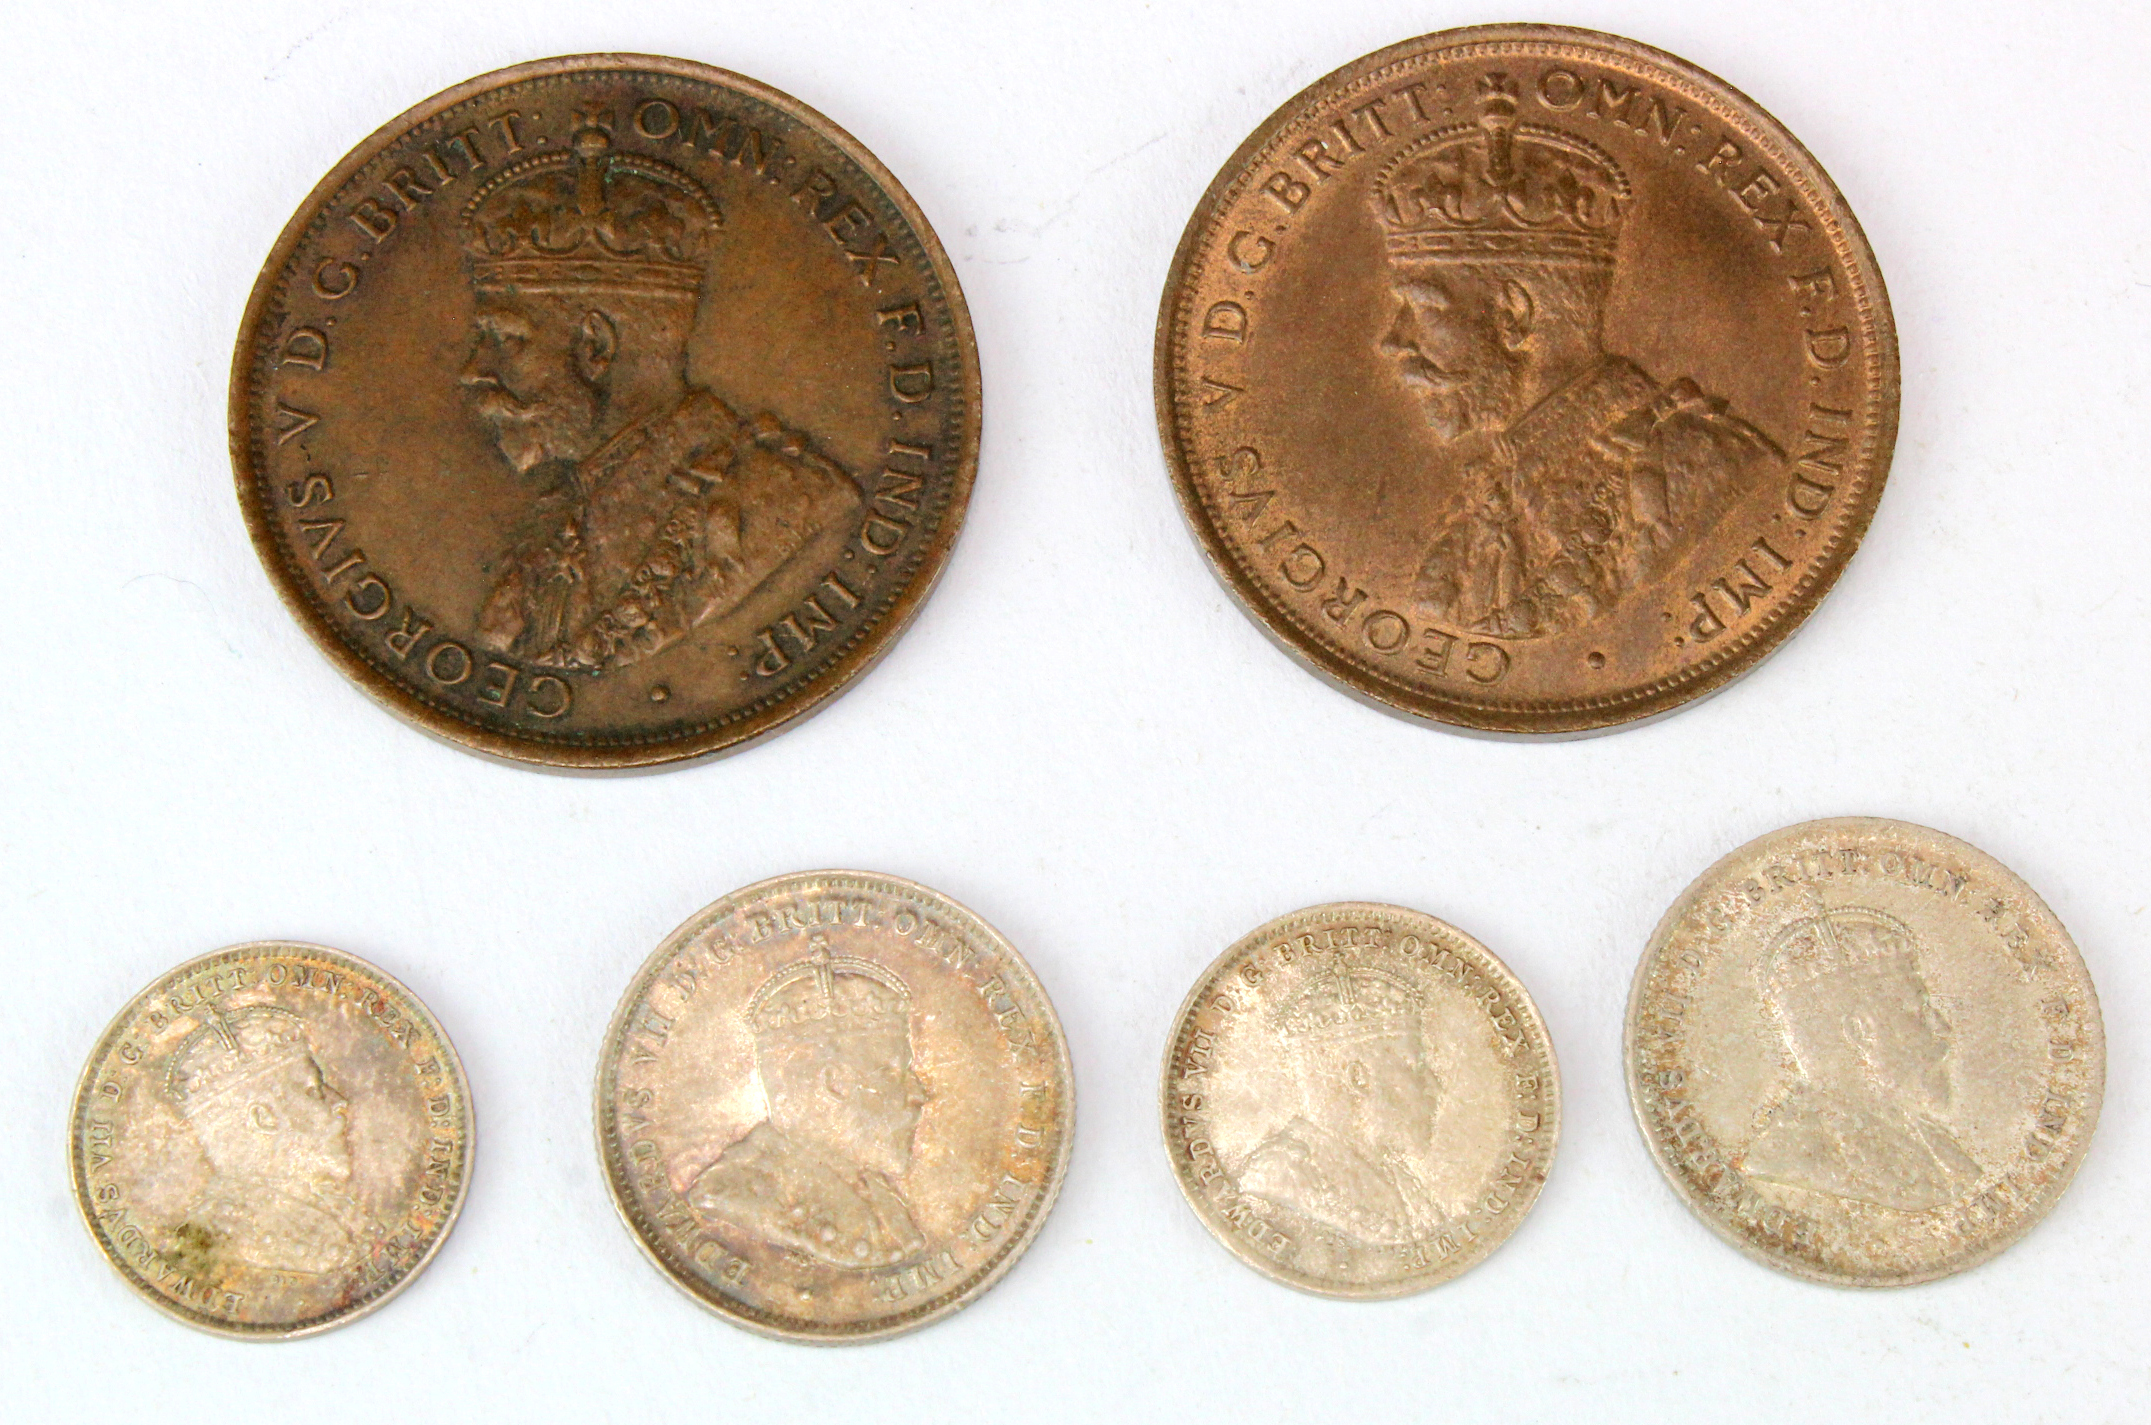 Australia (6): Pennies: 1911 GEF with lustre, ditto VF; Threepences: 1910 EF tone spot, ditto